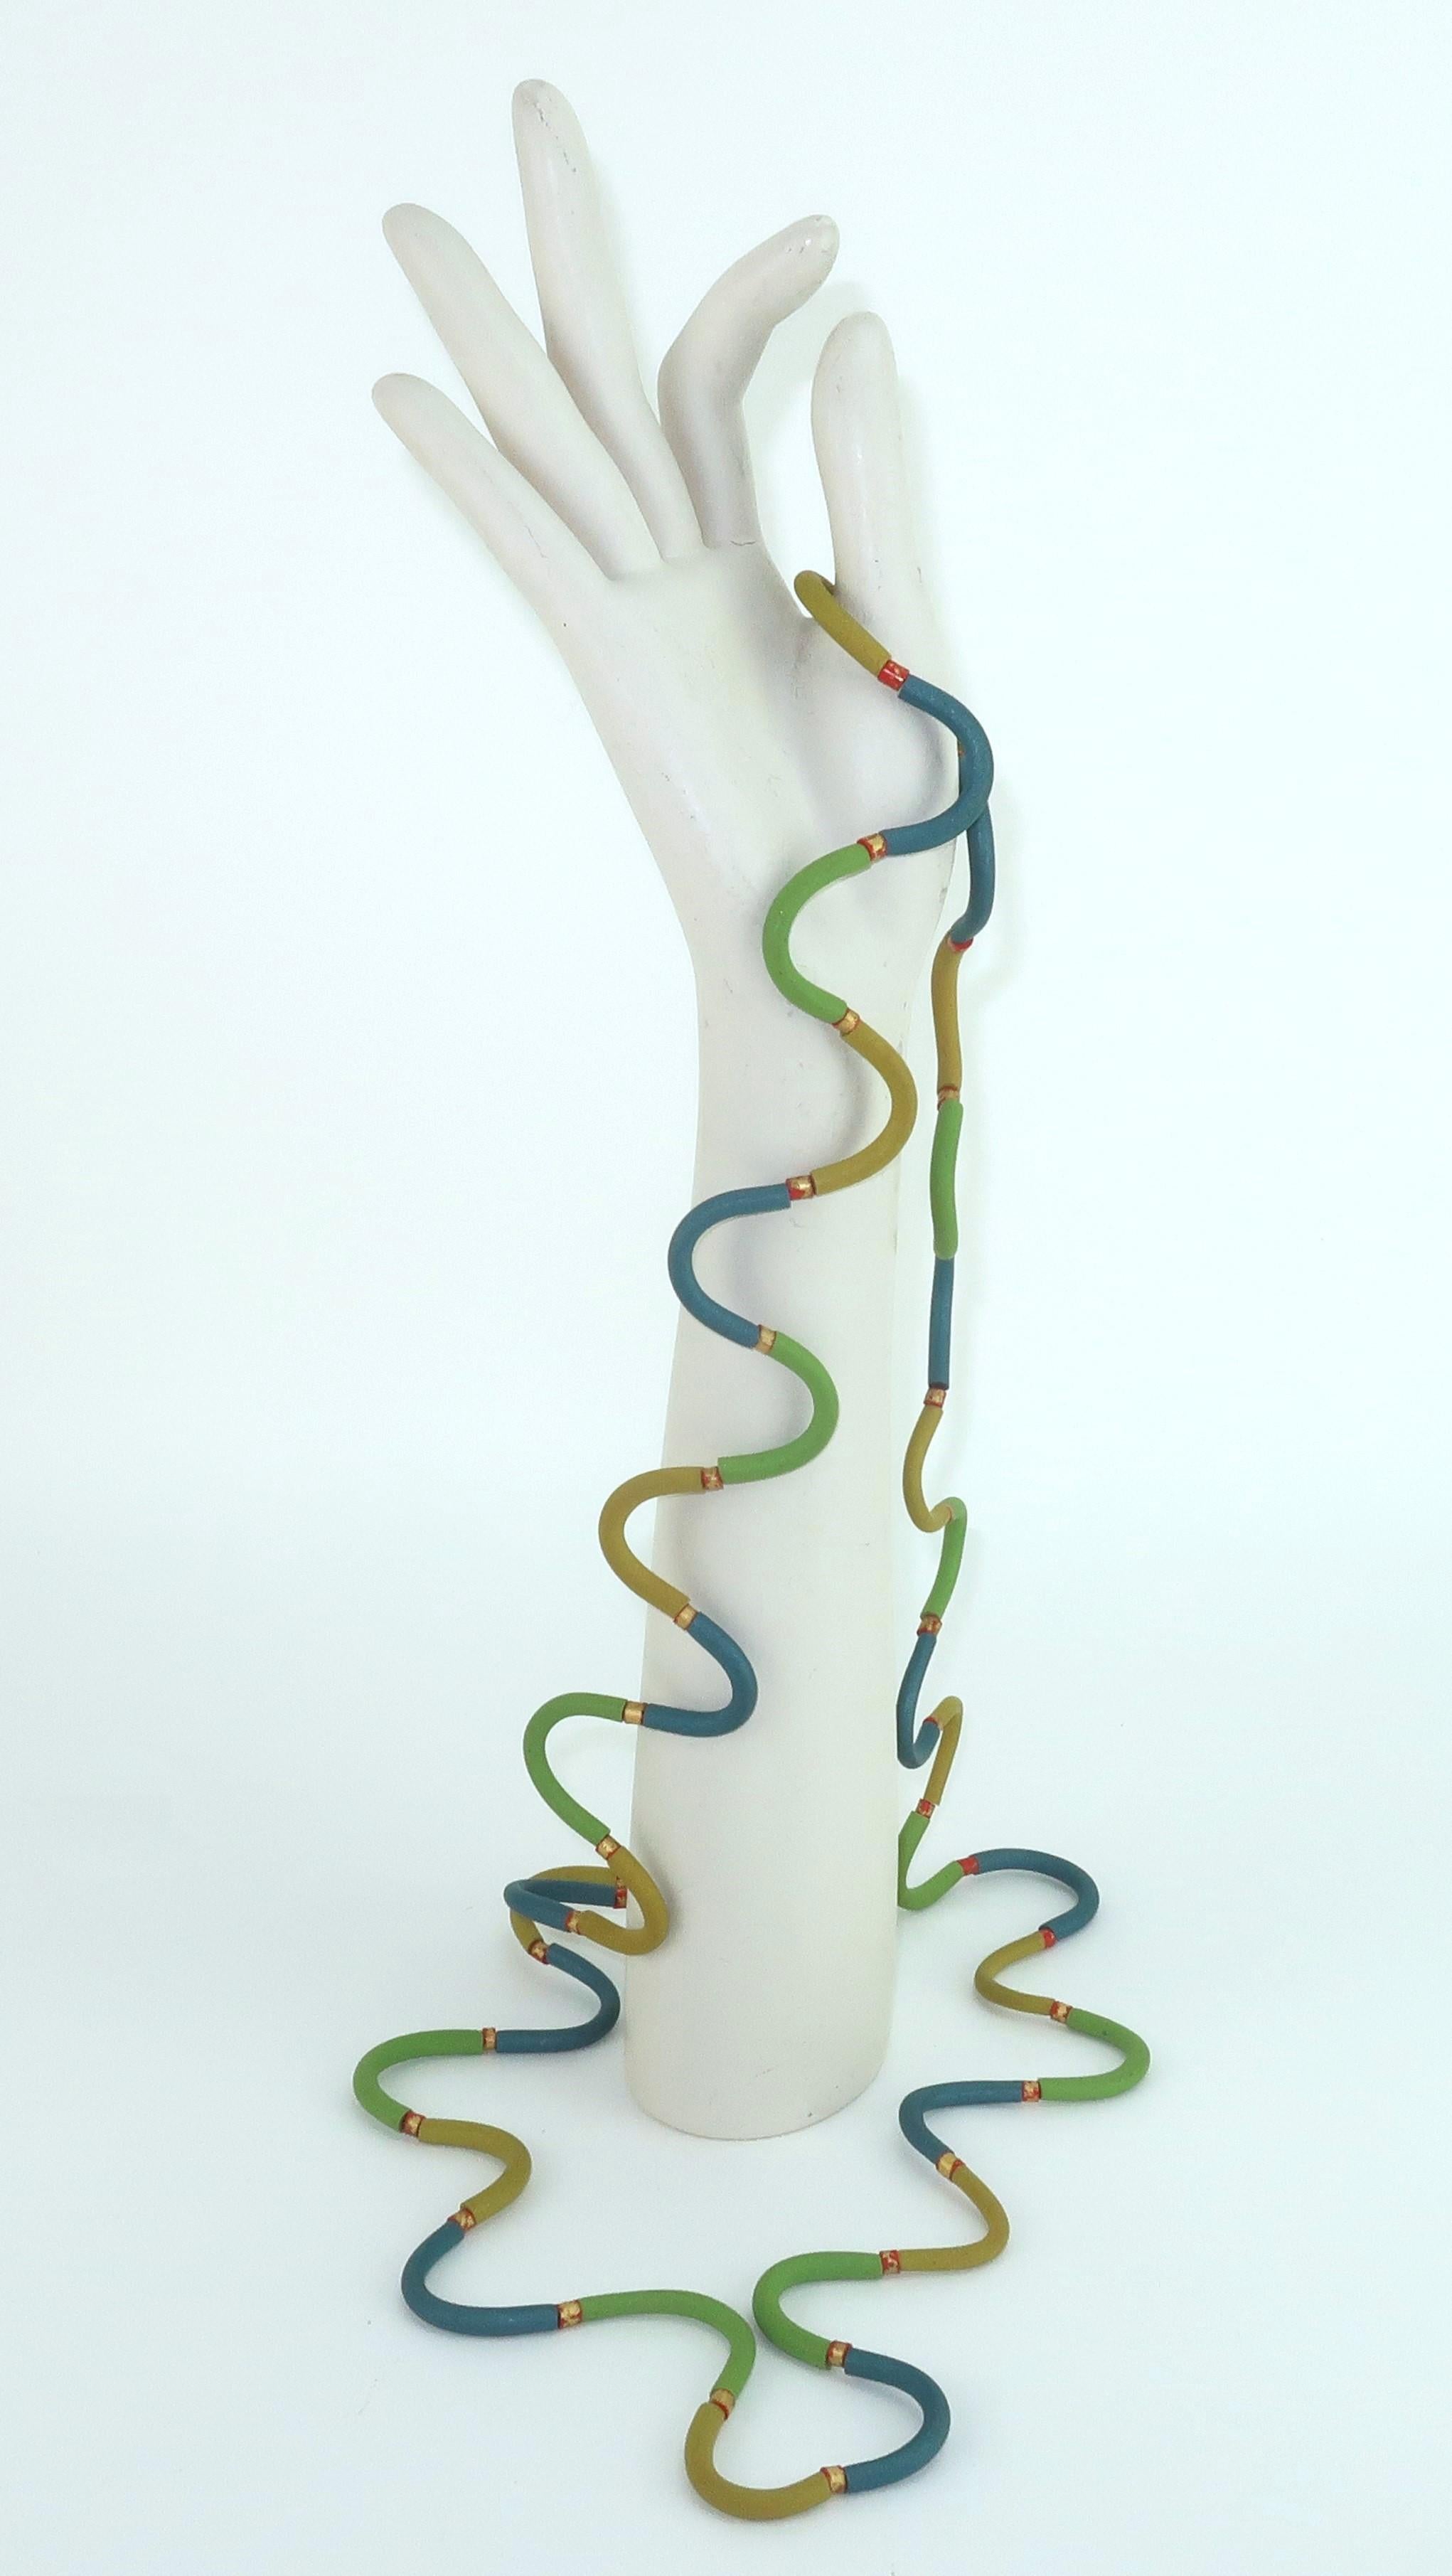 Ford & Forlano Sculptural Squiggle Bead Necklace, 1980's For Sale 6